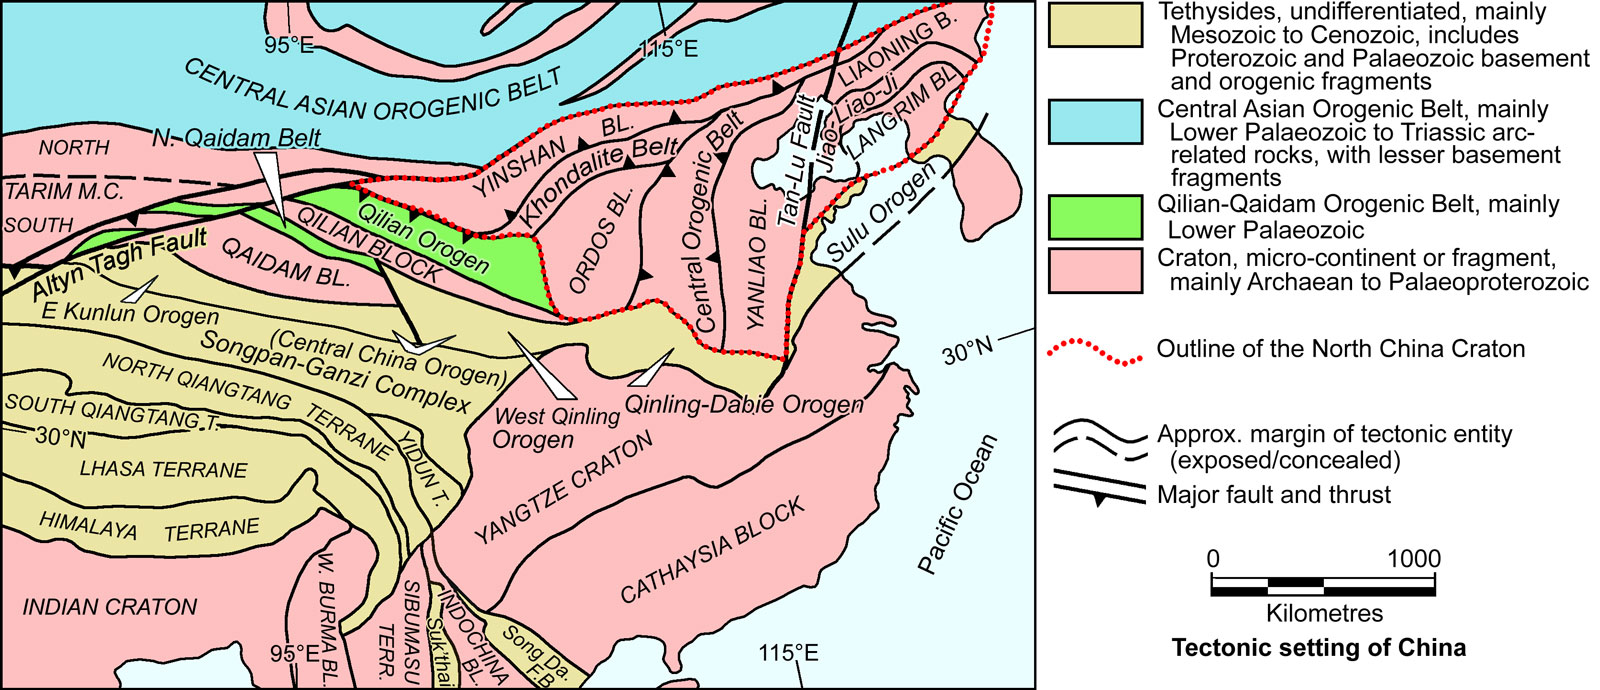 Tectonic elements in which the Bangong Co-Nujiang Mineral Belt is set